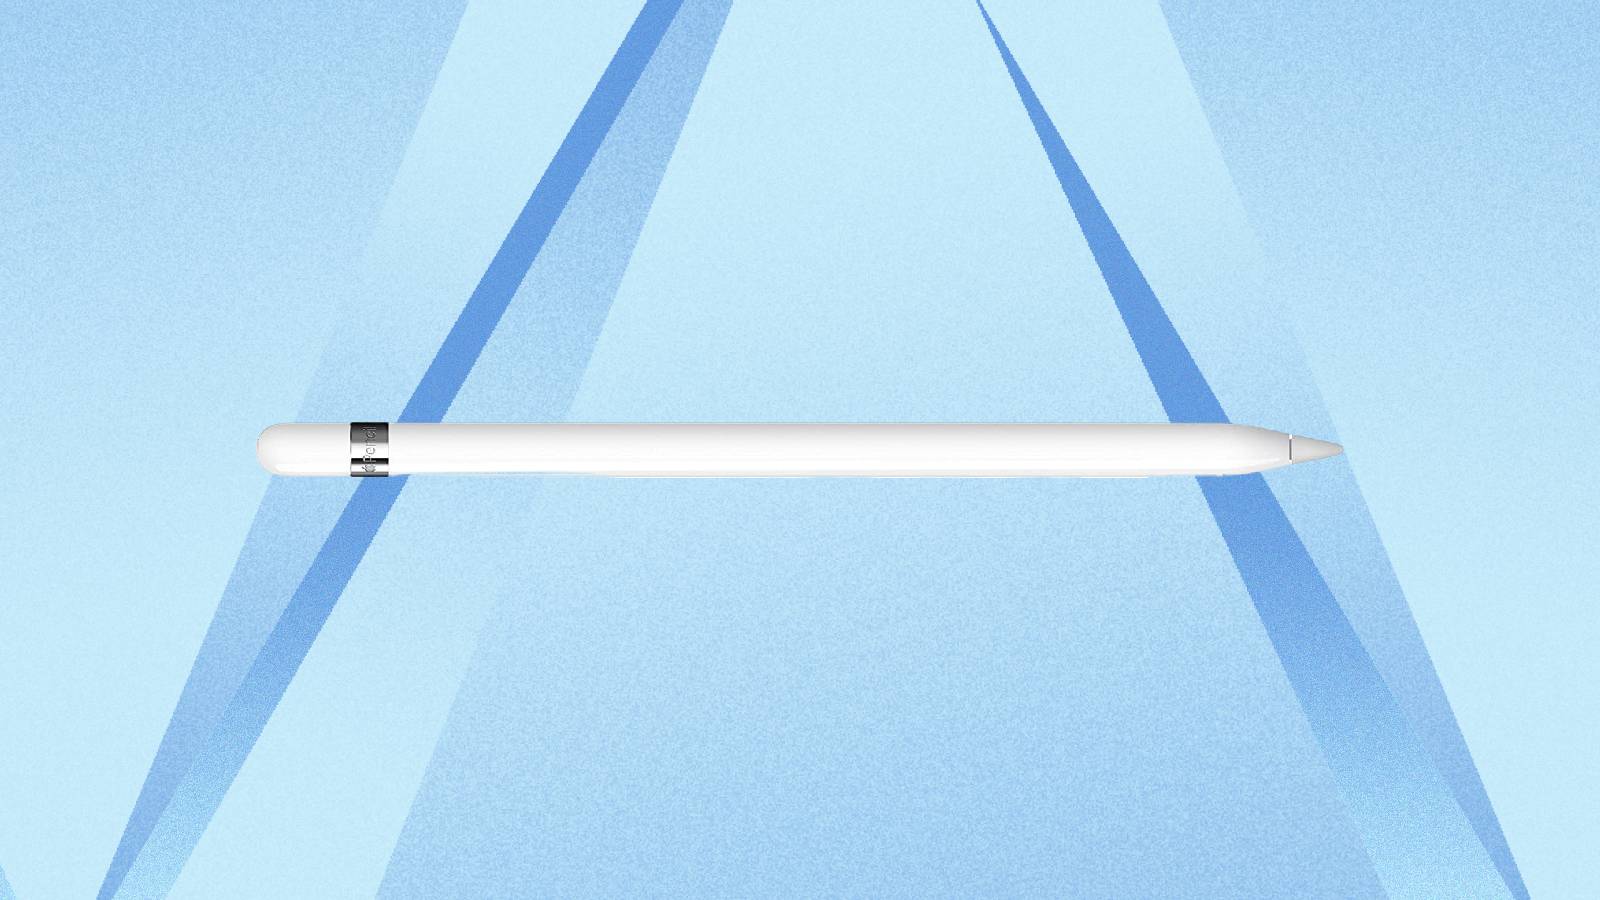 Best Apple Pencil Deals: Save on Apple's Styluses and Third-Party